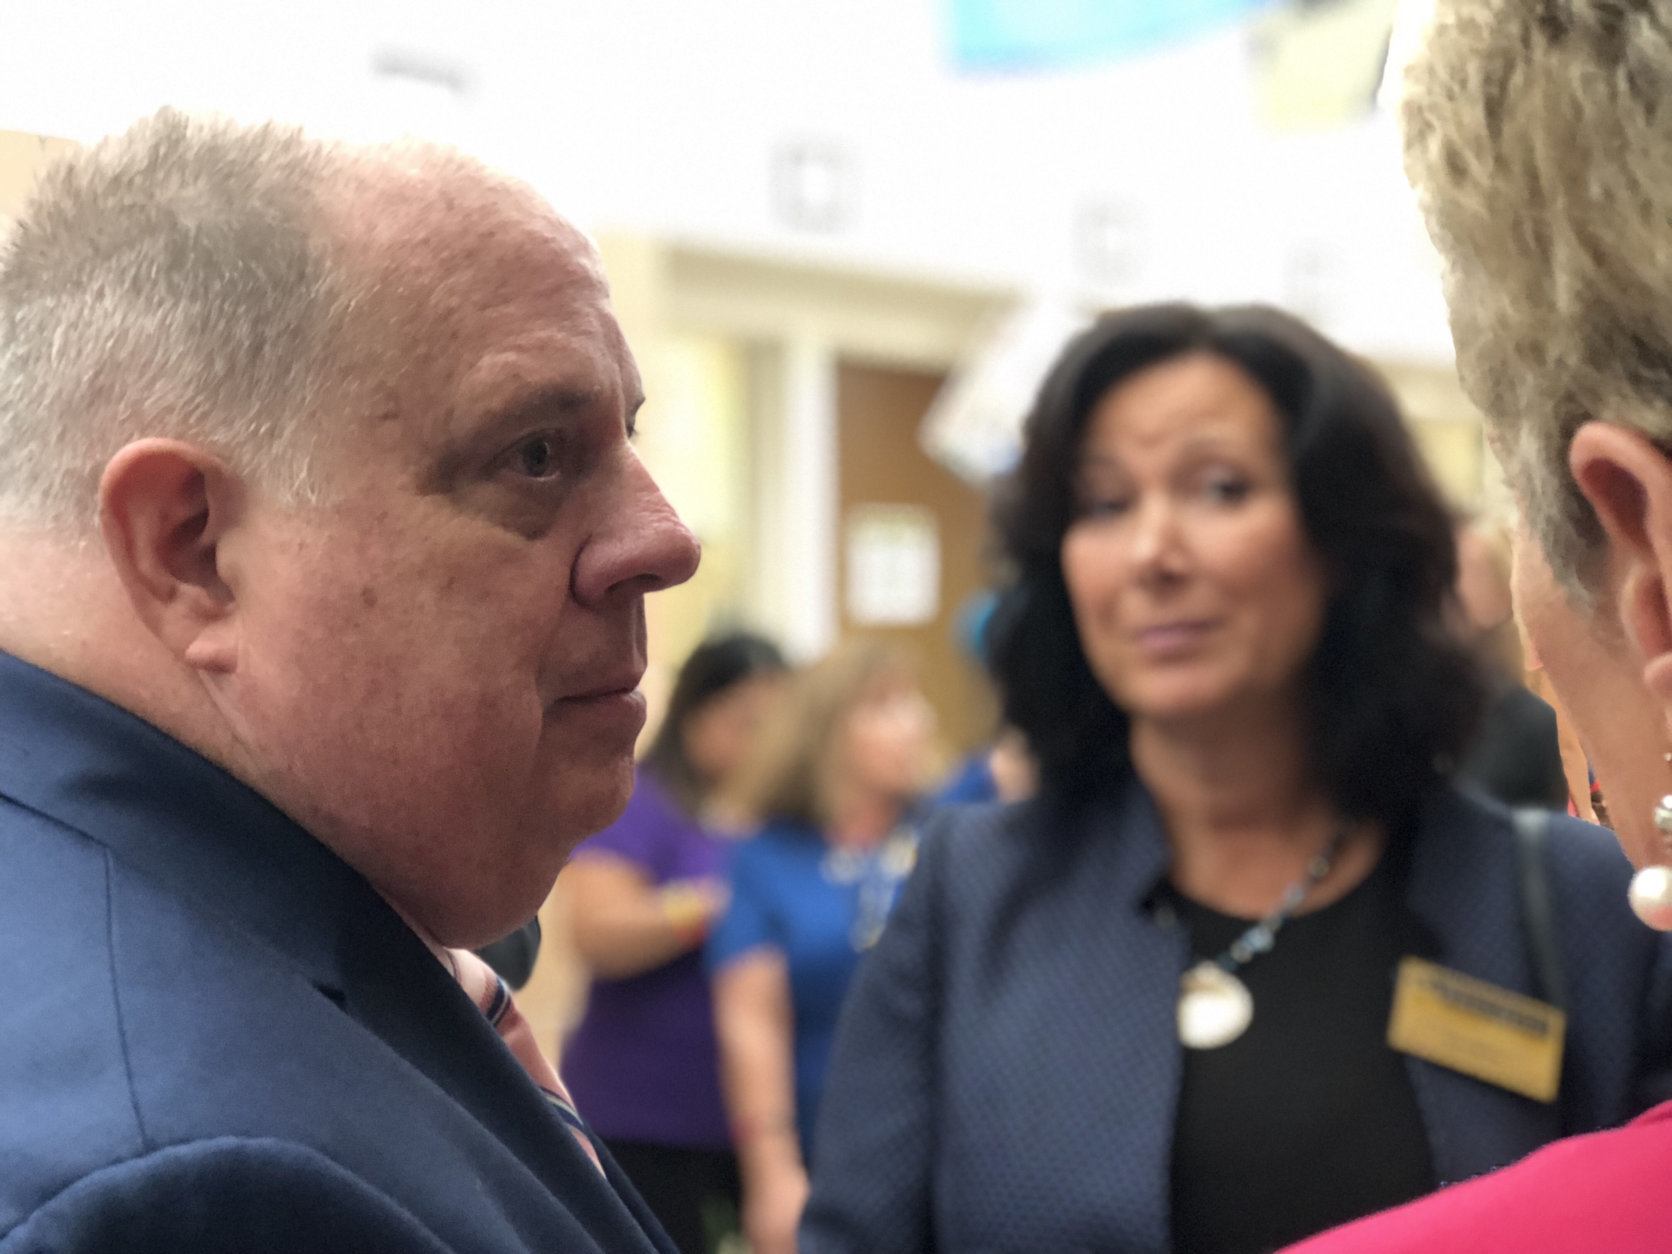 Maryland Gov. Larry Hogan spoke to state school board officials about the "Safe Schools Maryland" app and tip line at the Maryland Emergency Management Agency facility in Reisterstown, Maryland, on Wednesday, Oct. 3, 2018. (WTOP/Kate Ryan)